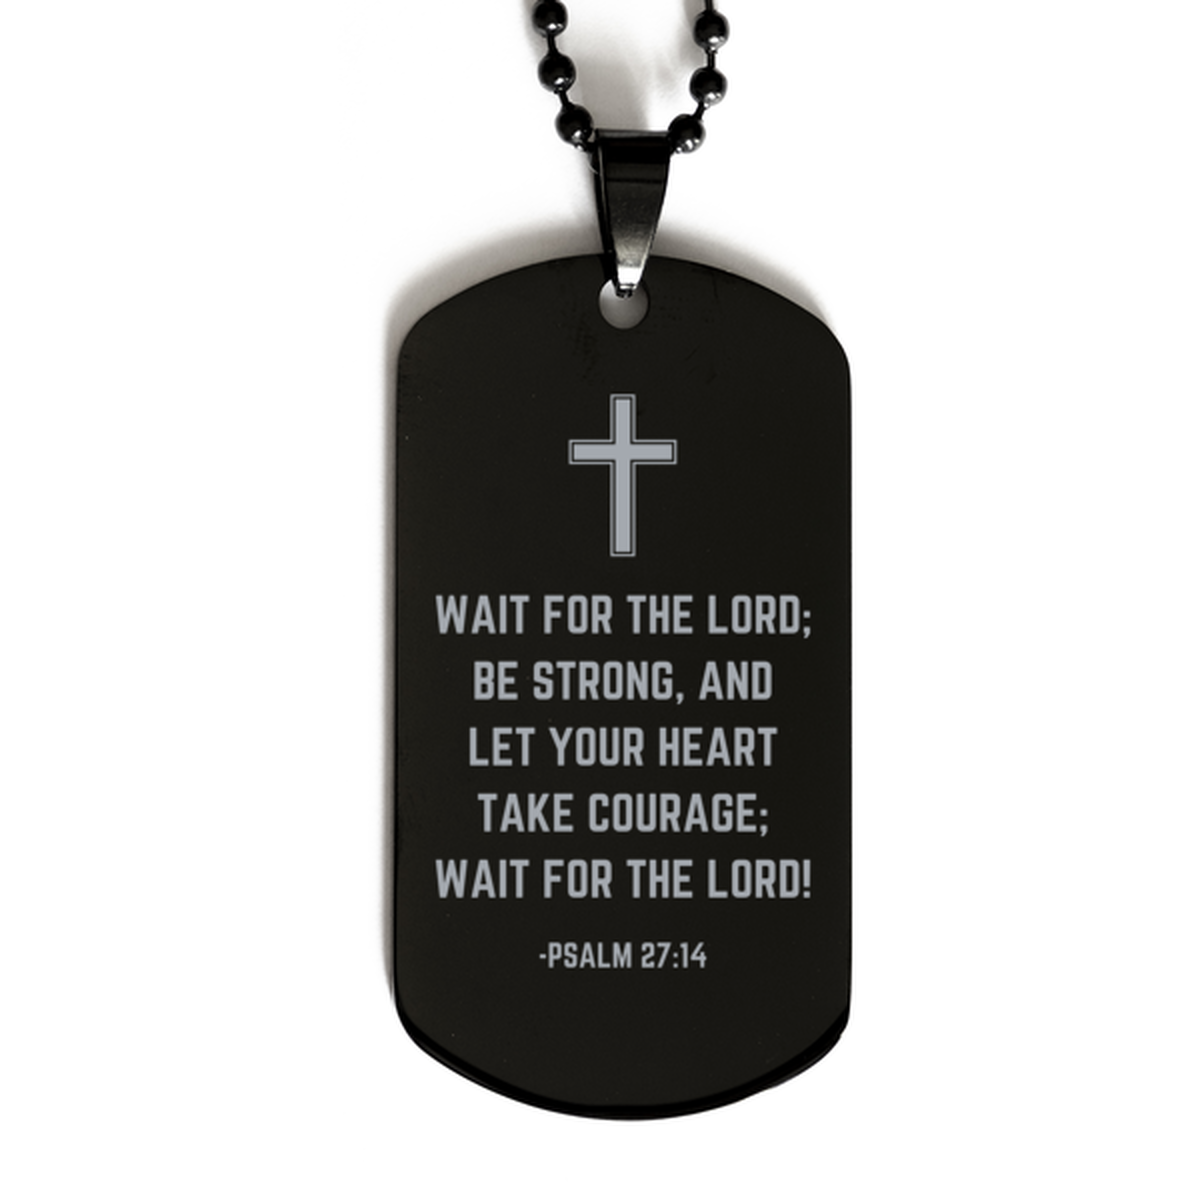 Baptism Gifts For Teenage Boys Girls, Christian Bible Verse Black Dog Tag, Wait for the Lord, Confirmation Gifts, Bible Verse Necklace for Son, Godson, Grandson, Nephew